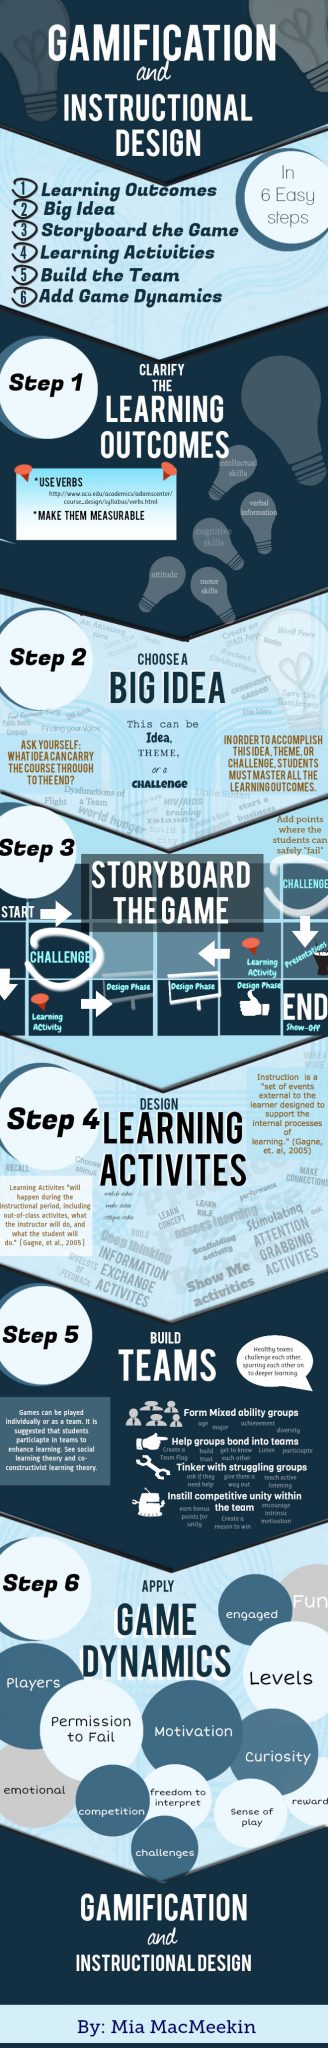 gamification-instructional-design